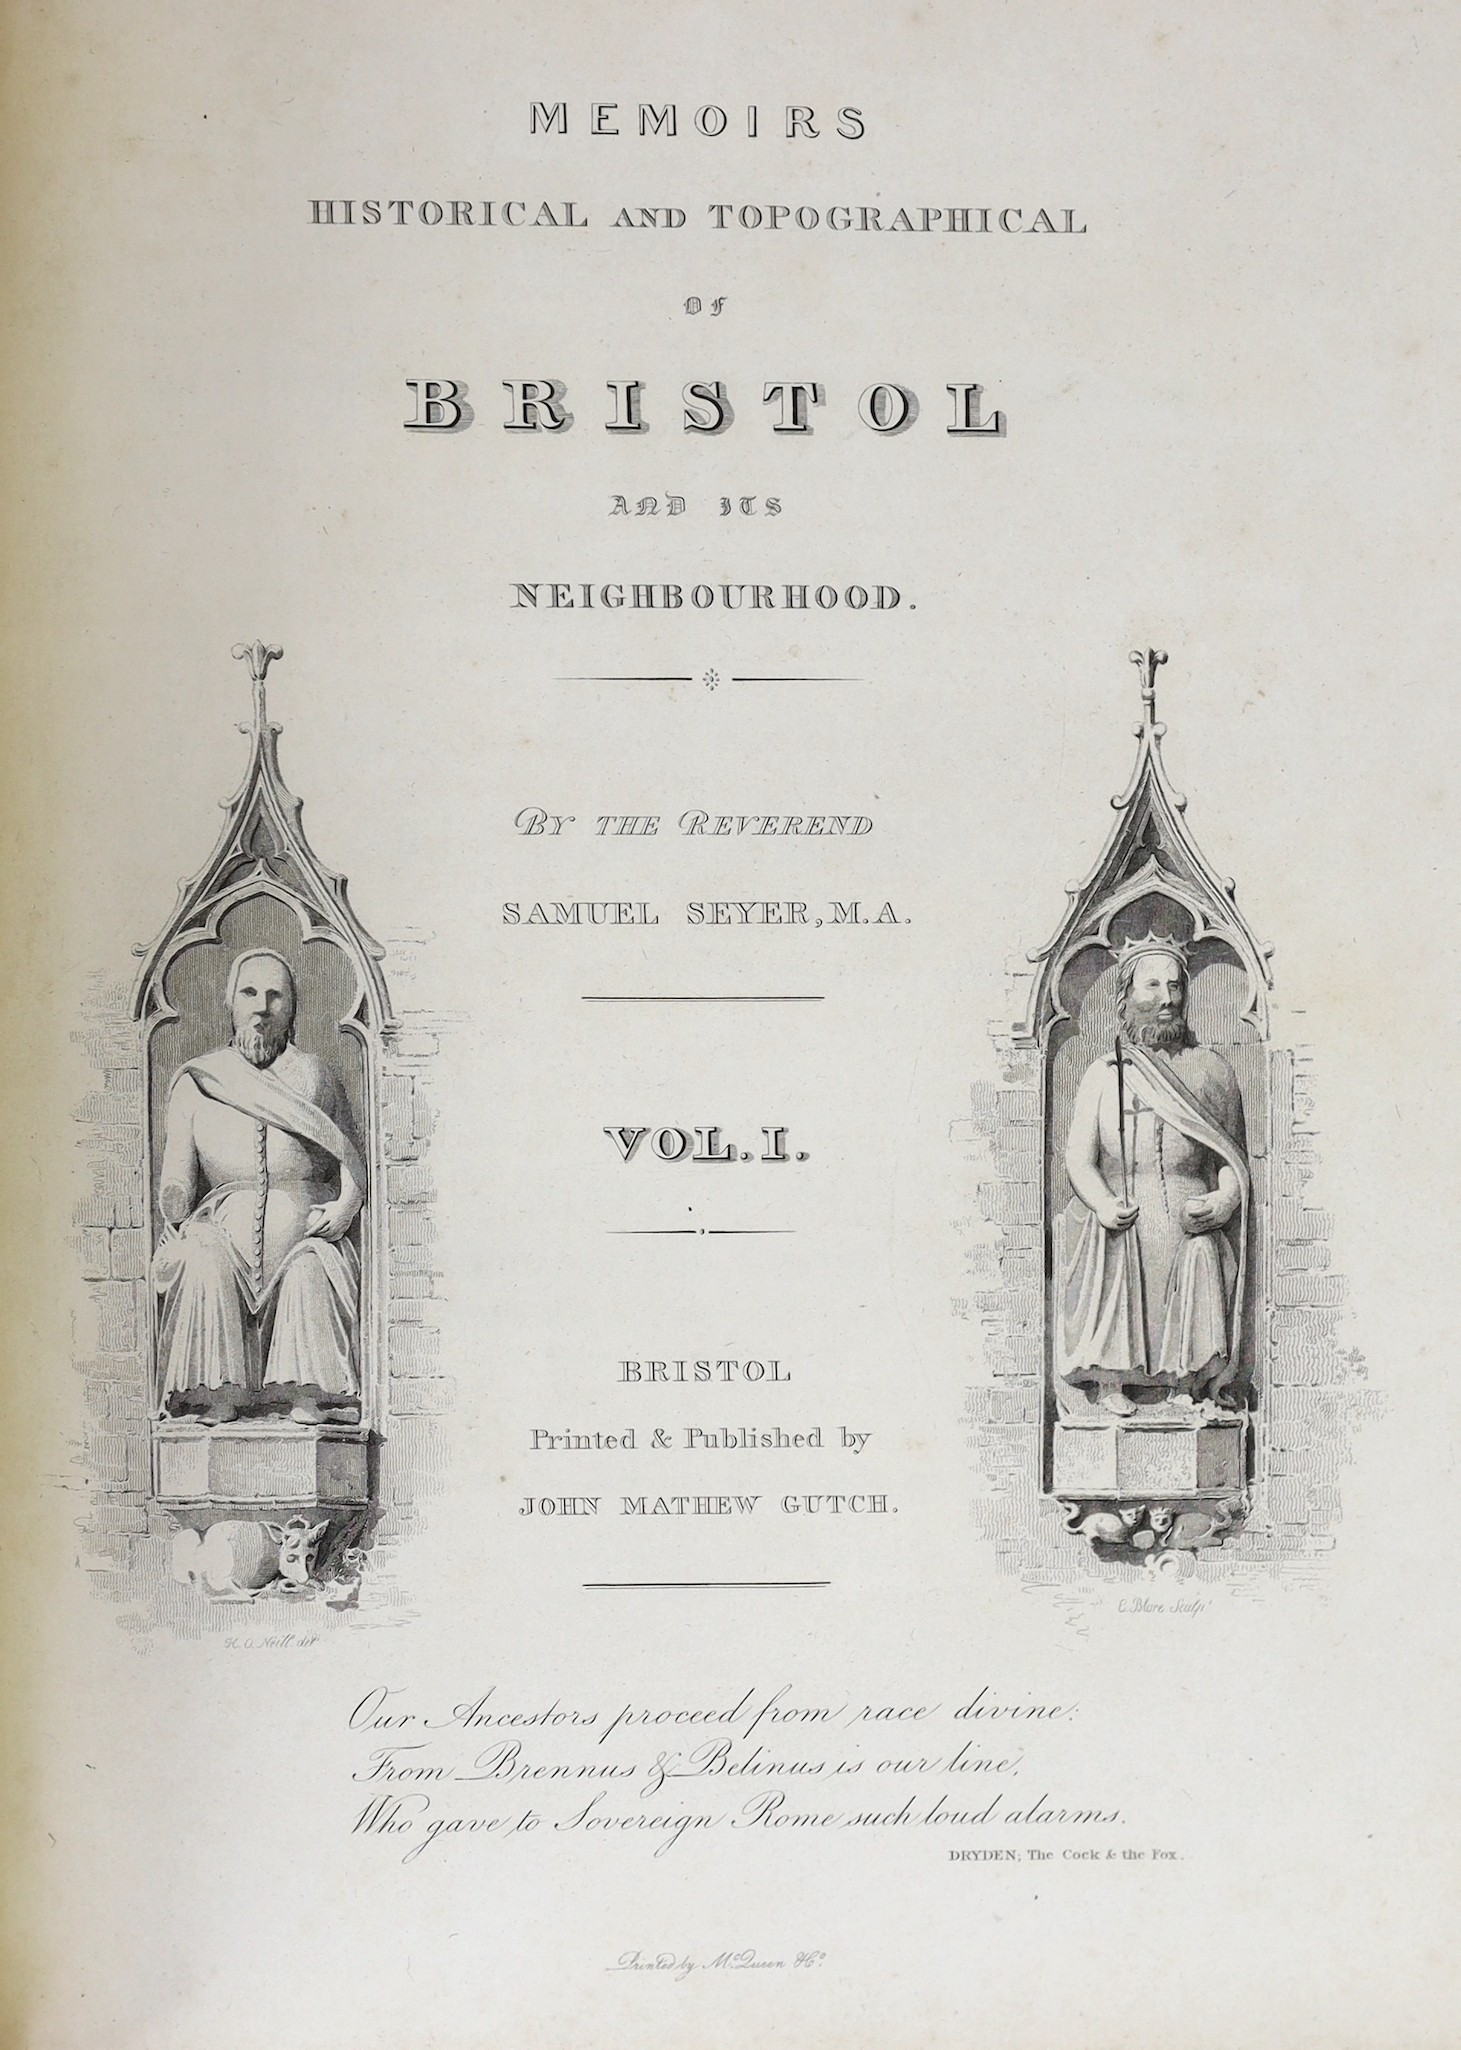 SOMERSET, BRISTOL: Seyer, Rev. Samuel - Memoirs Historical and Topgraphical of Bristol and its Neighbourhood....2 vols. engraved pictorial and printed titles, num. plates (incl. maps and plans, some lithographed), text e